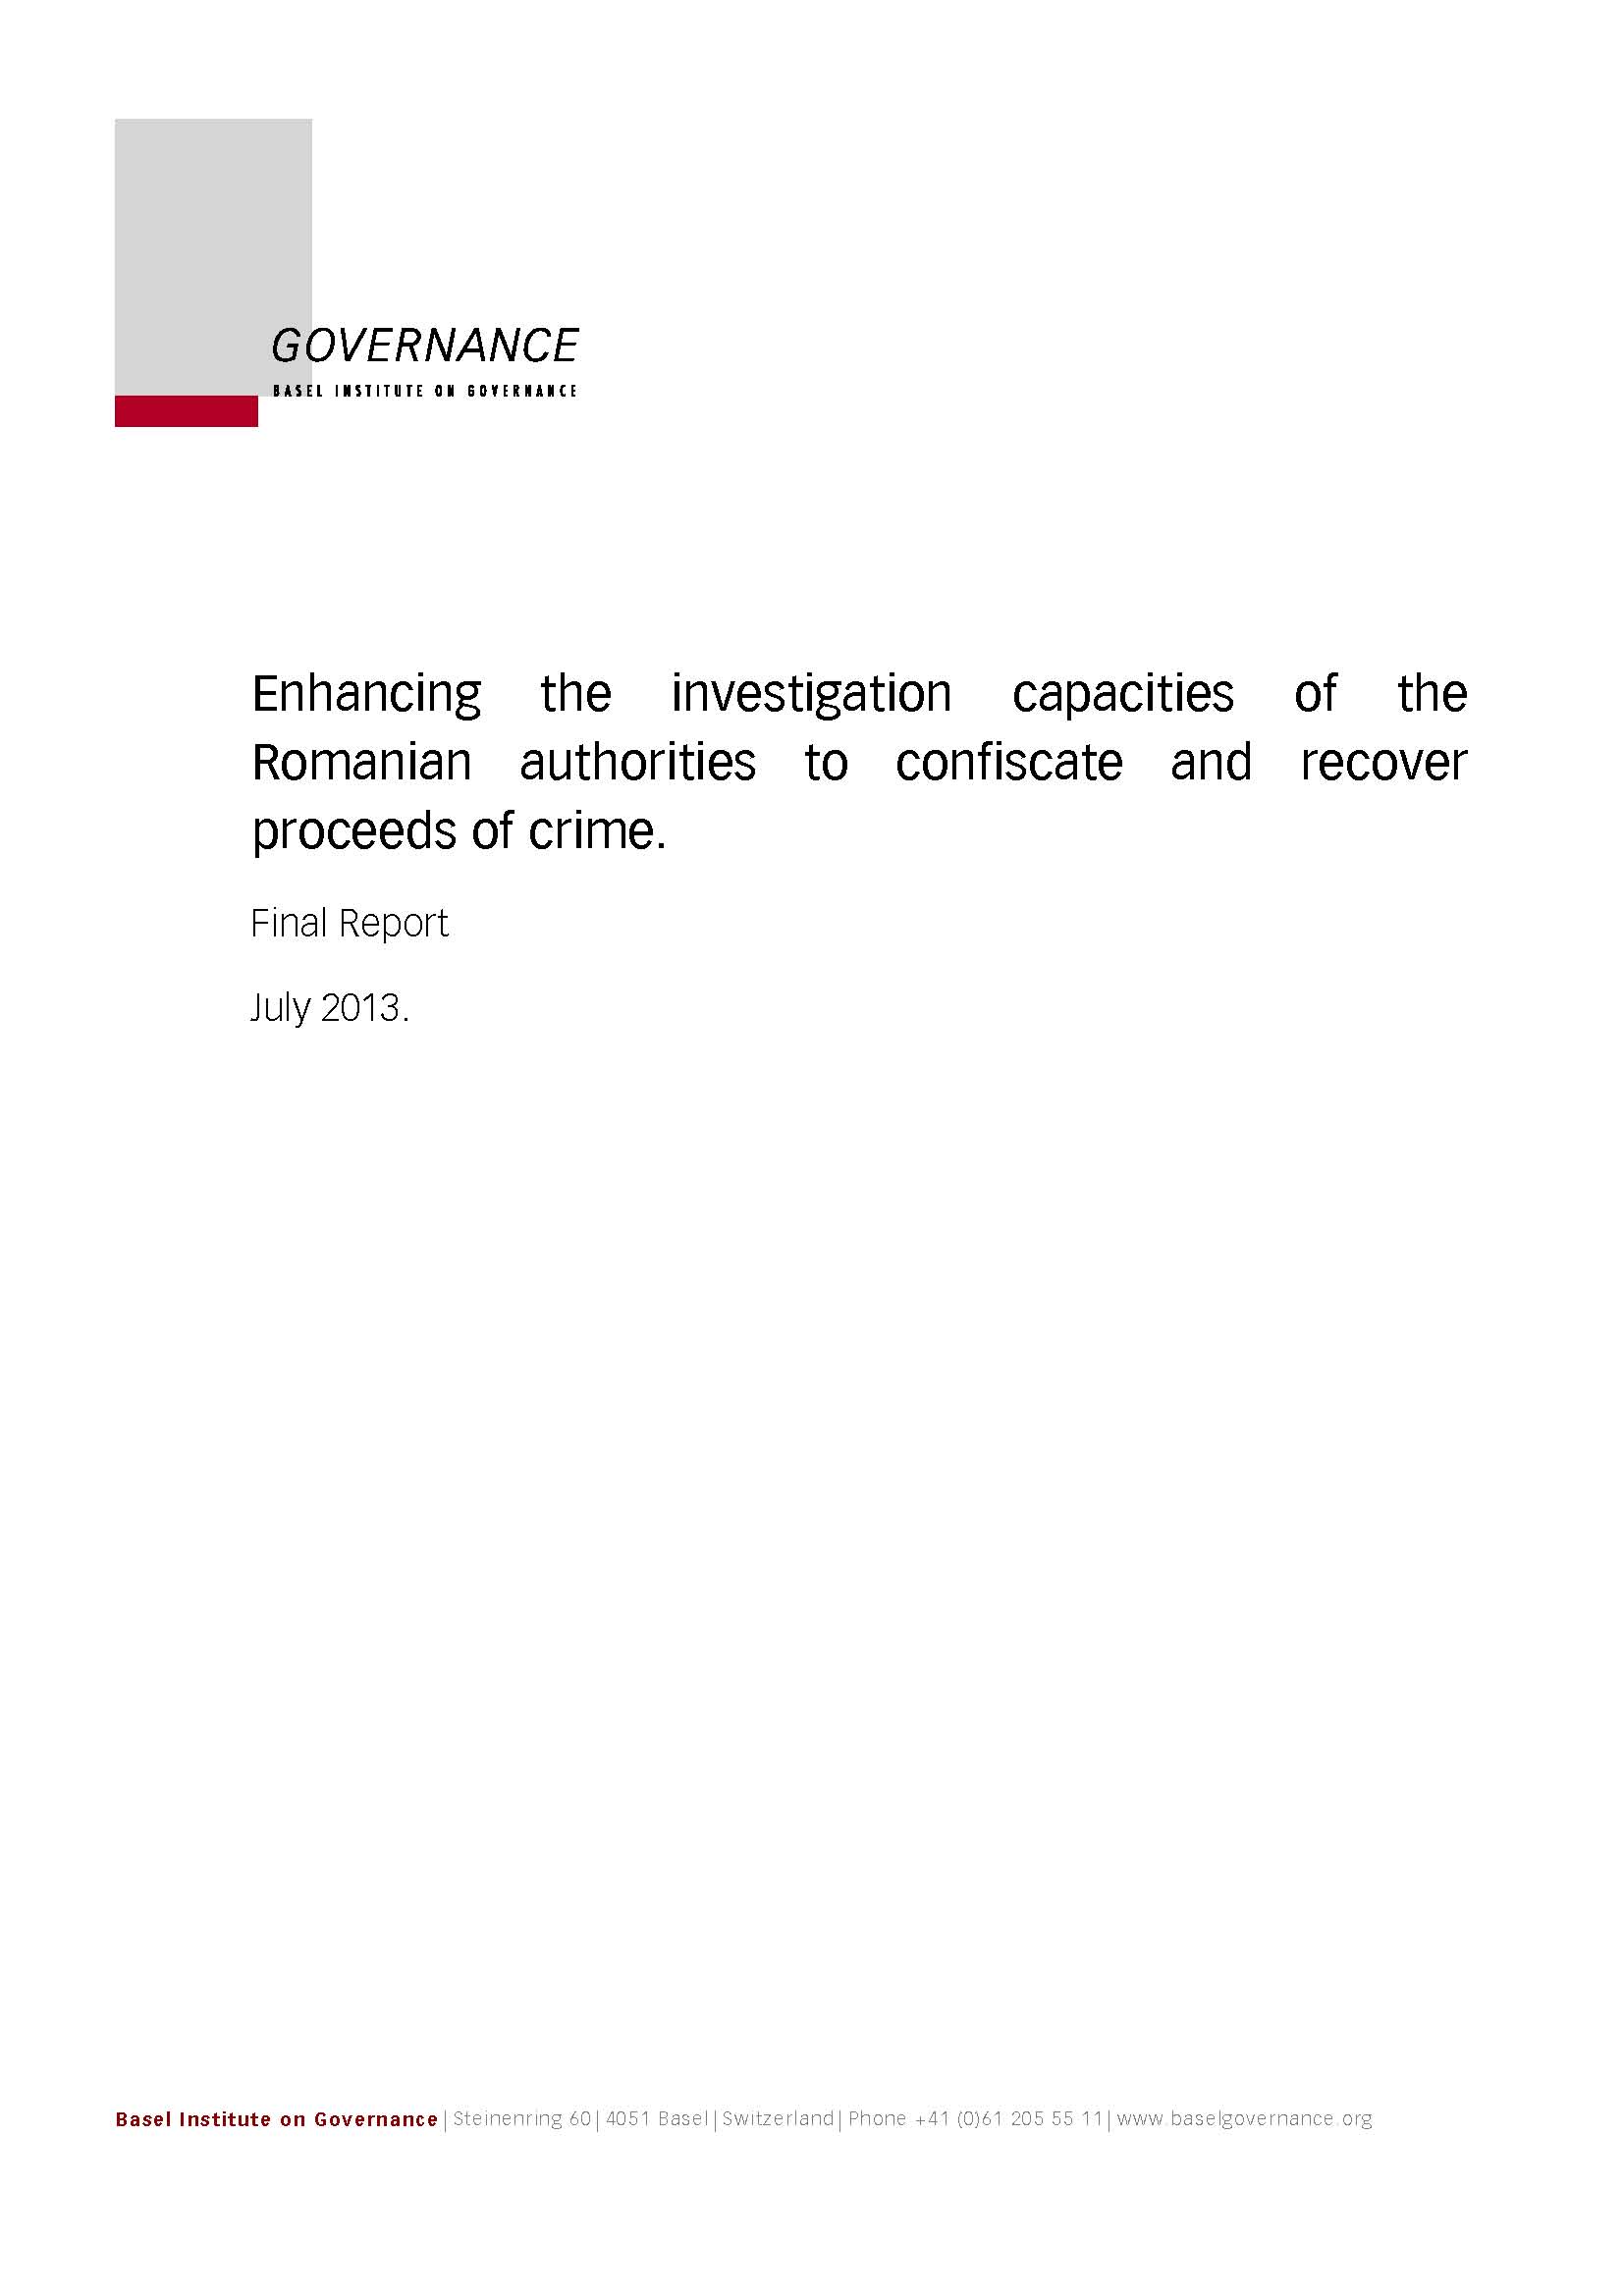 Cover page of Enhancing the Investigation Capacities of the Romanian Authorities report